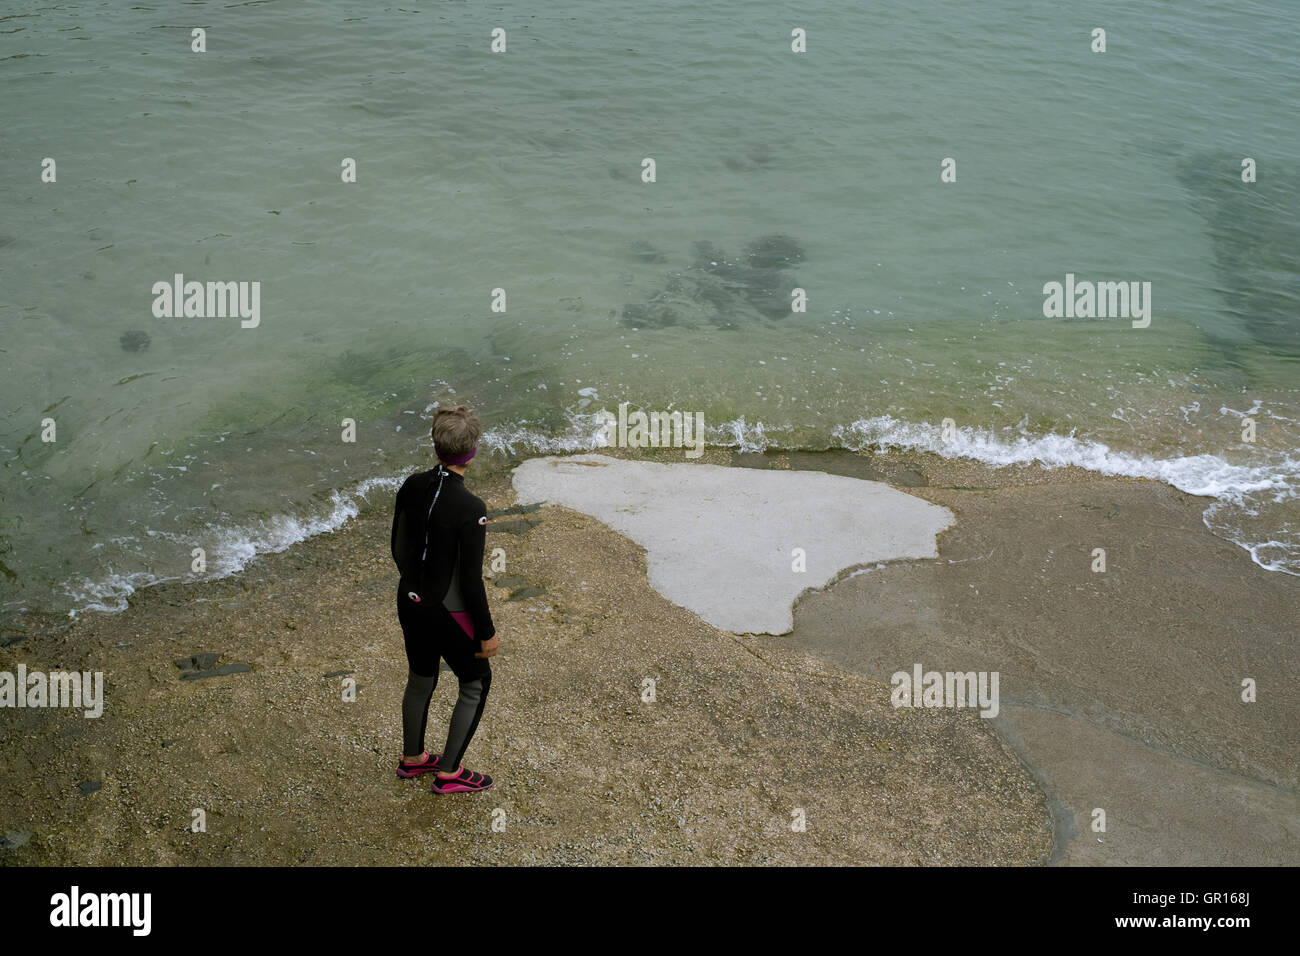 Portscatha, Cornwall, UK. 5th September, 2016. Woman prepares to enter the clear sea for an open water swim at Portscatho, Cornwall.  5th September 2016 Credit:  Mick Buston/Alamy Live News Stock Photo